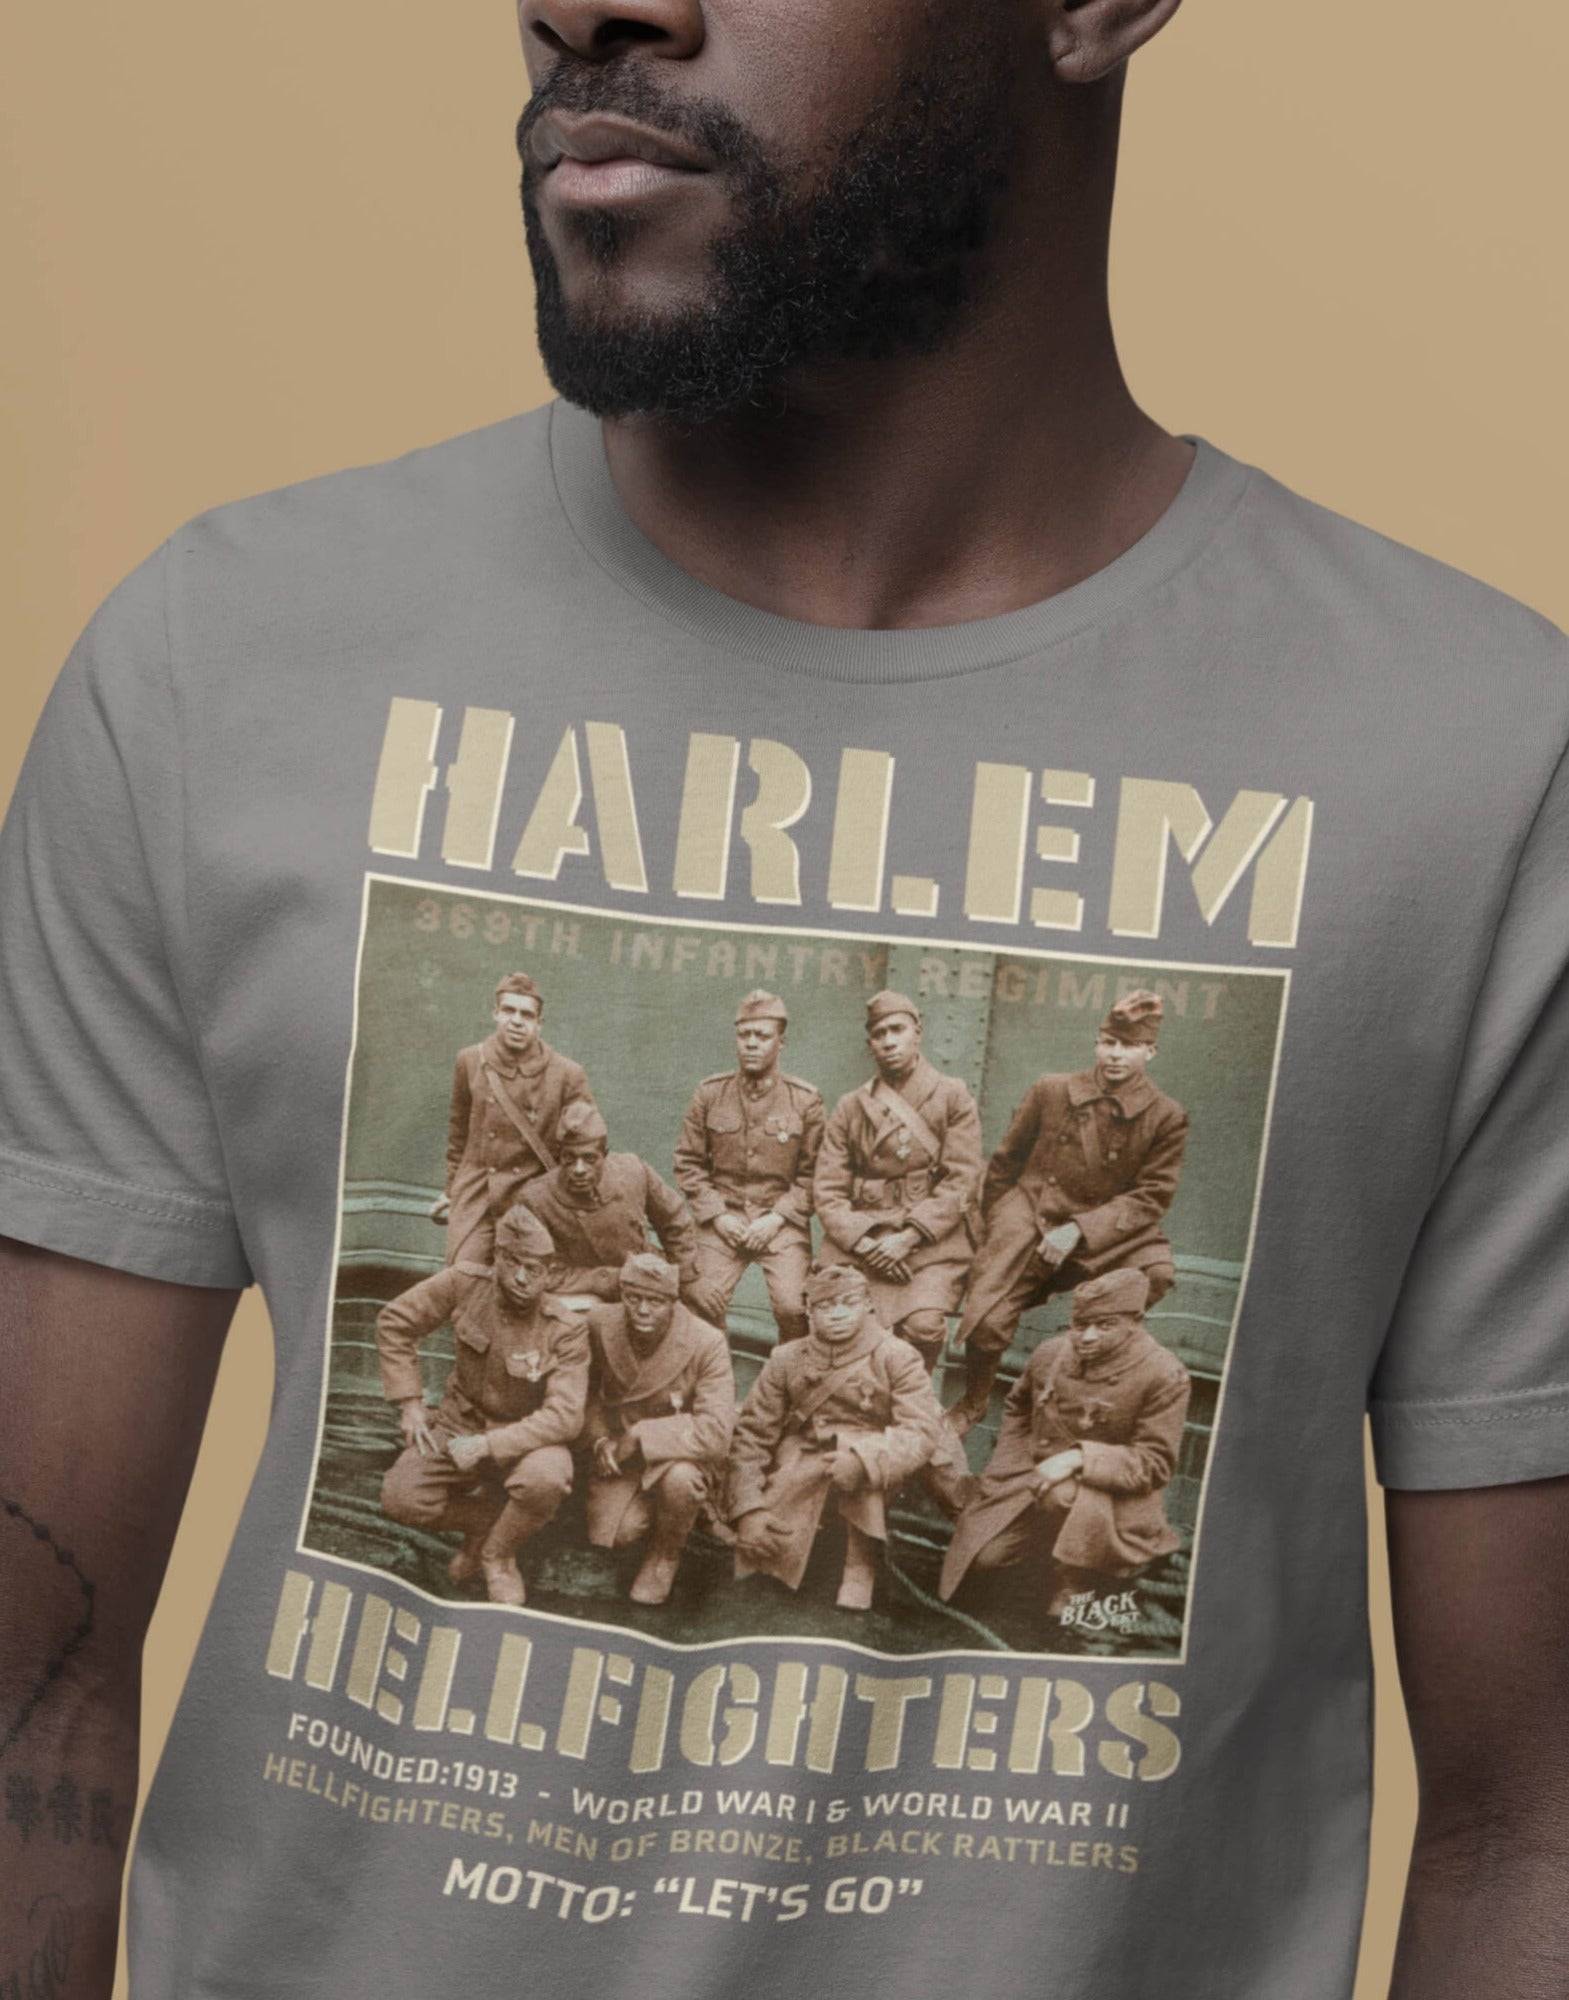 man wearing a grey t shirt with an image of the harlem hellfighters graphic design